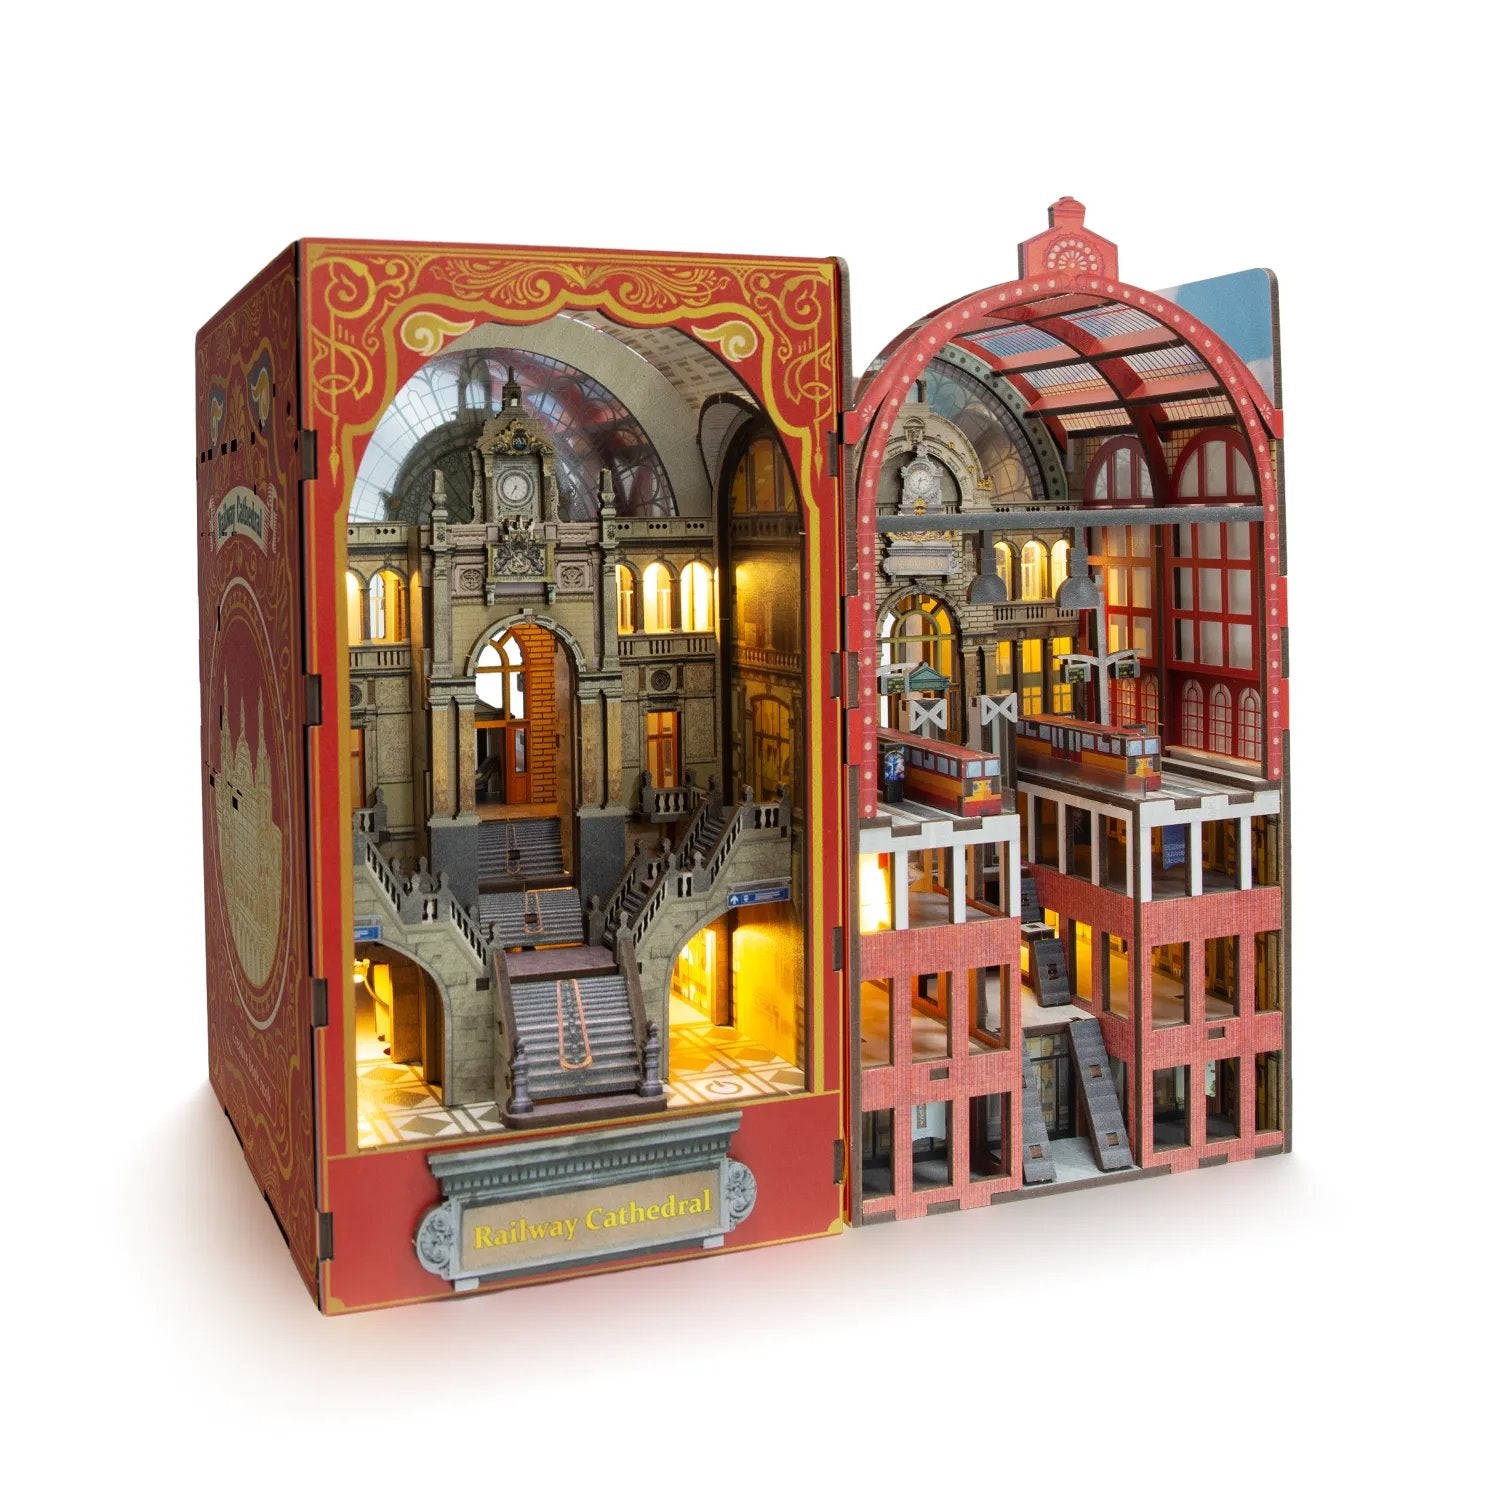 Railway Cathedral | DIY Book Nook Kit | Bookend in Double Scenes | 3d wooden puzzles | bookshelf diorama | miniature house